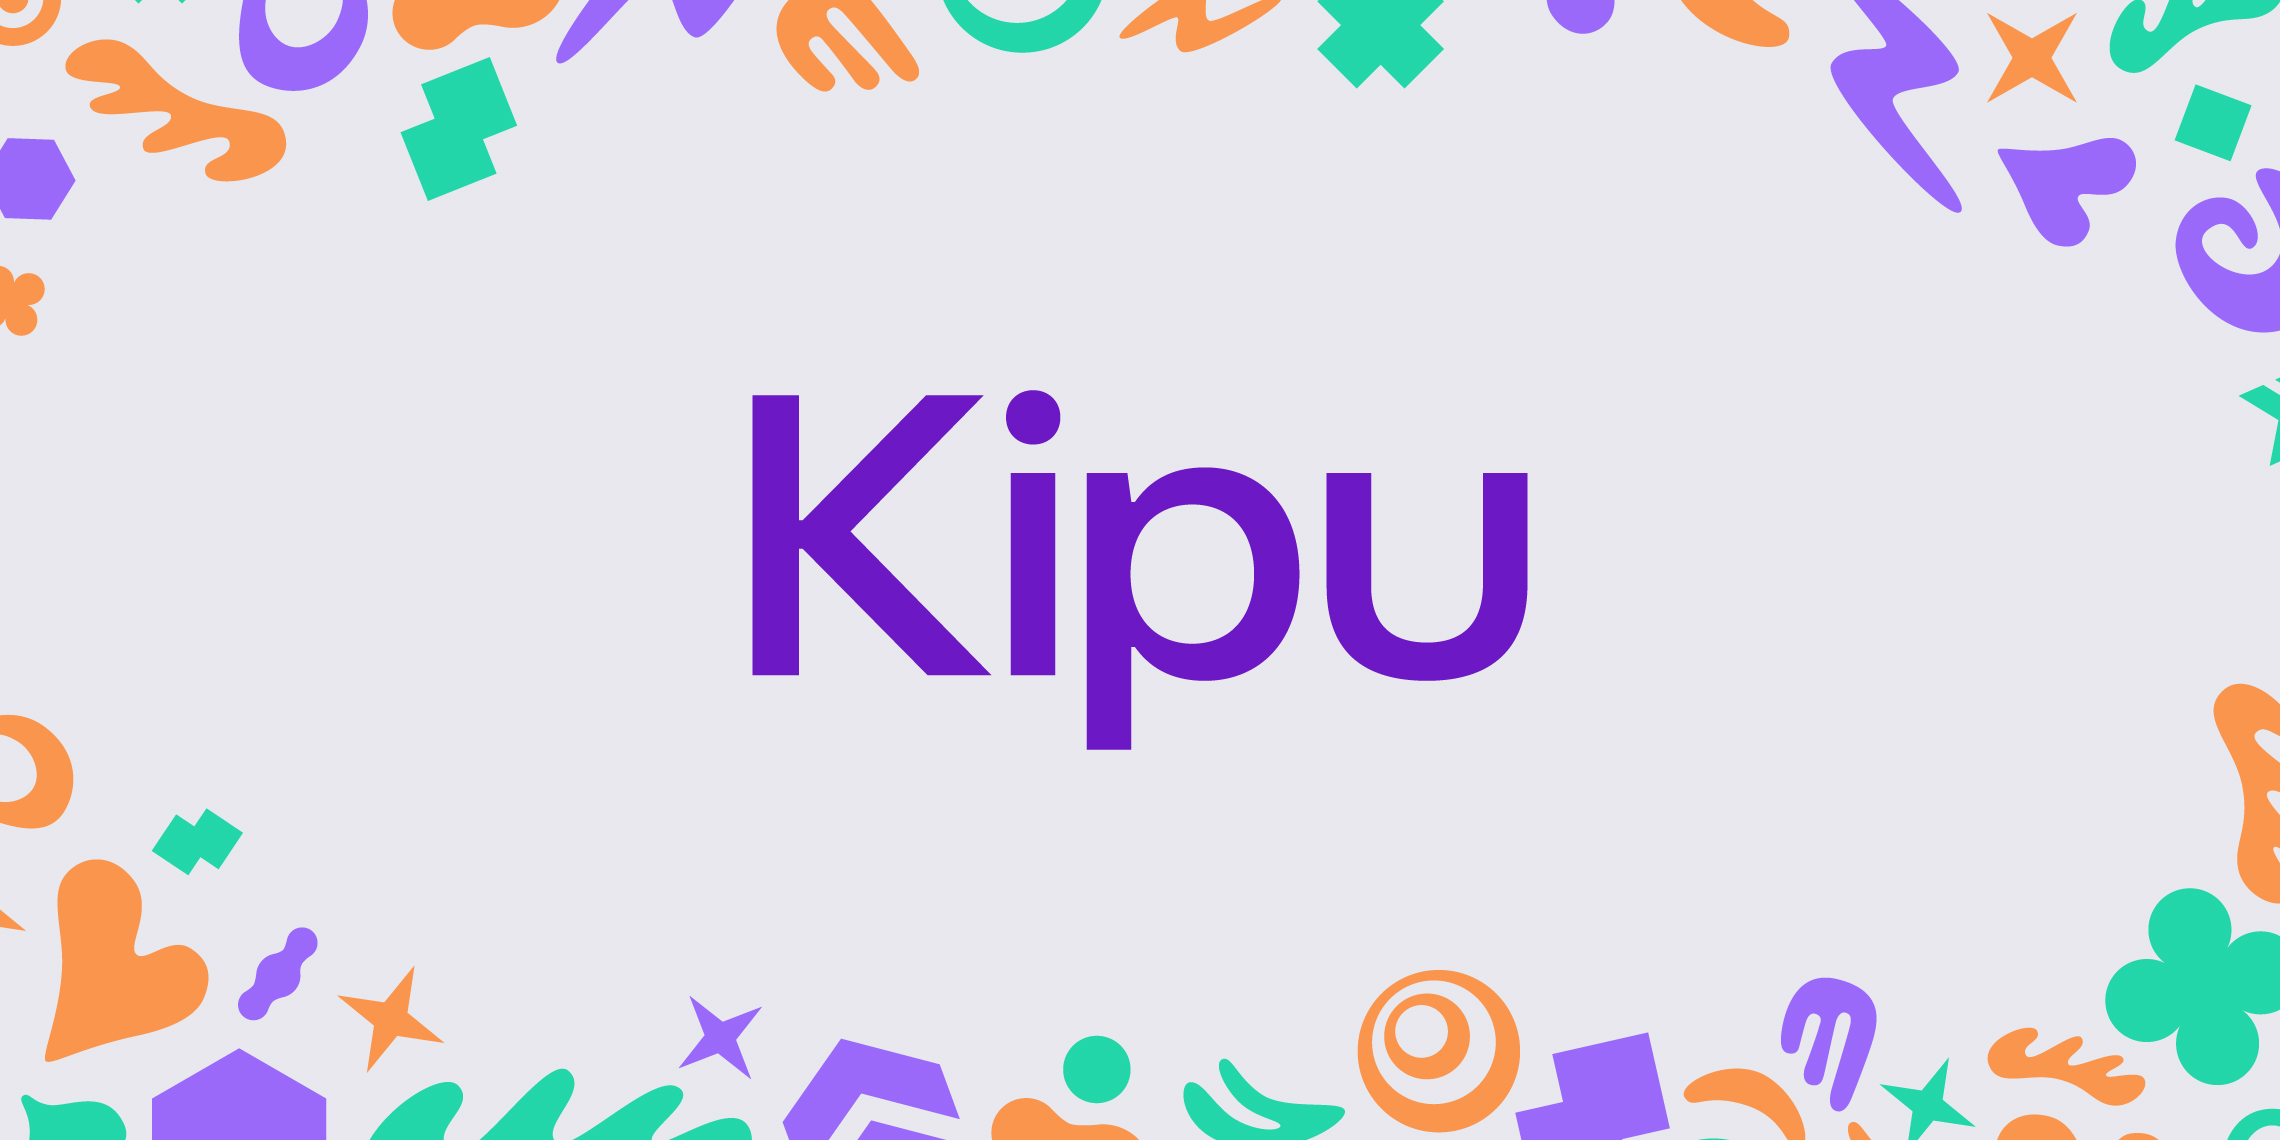 Examples of the design system developed for Kipu